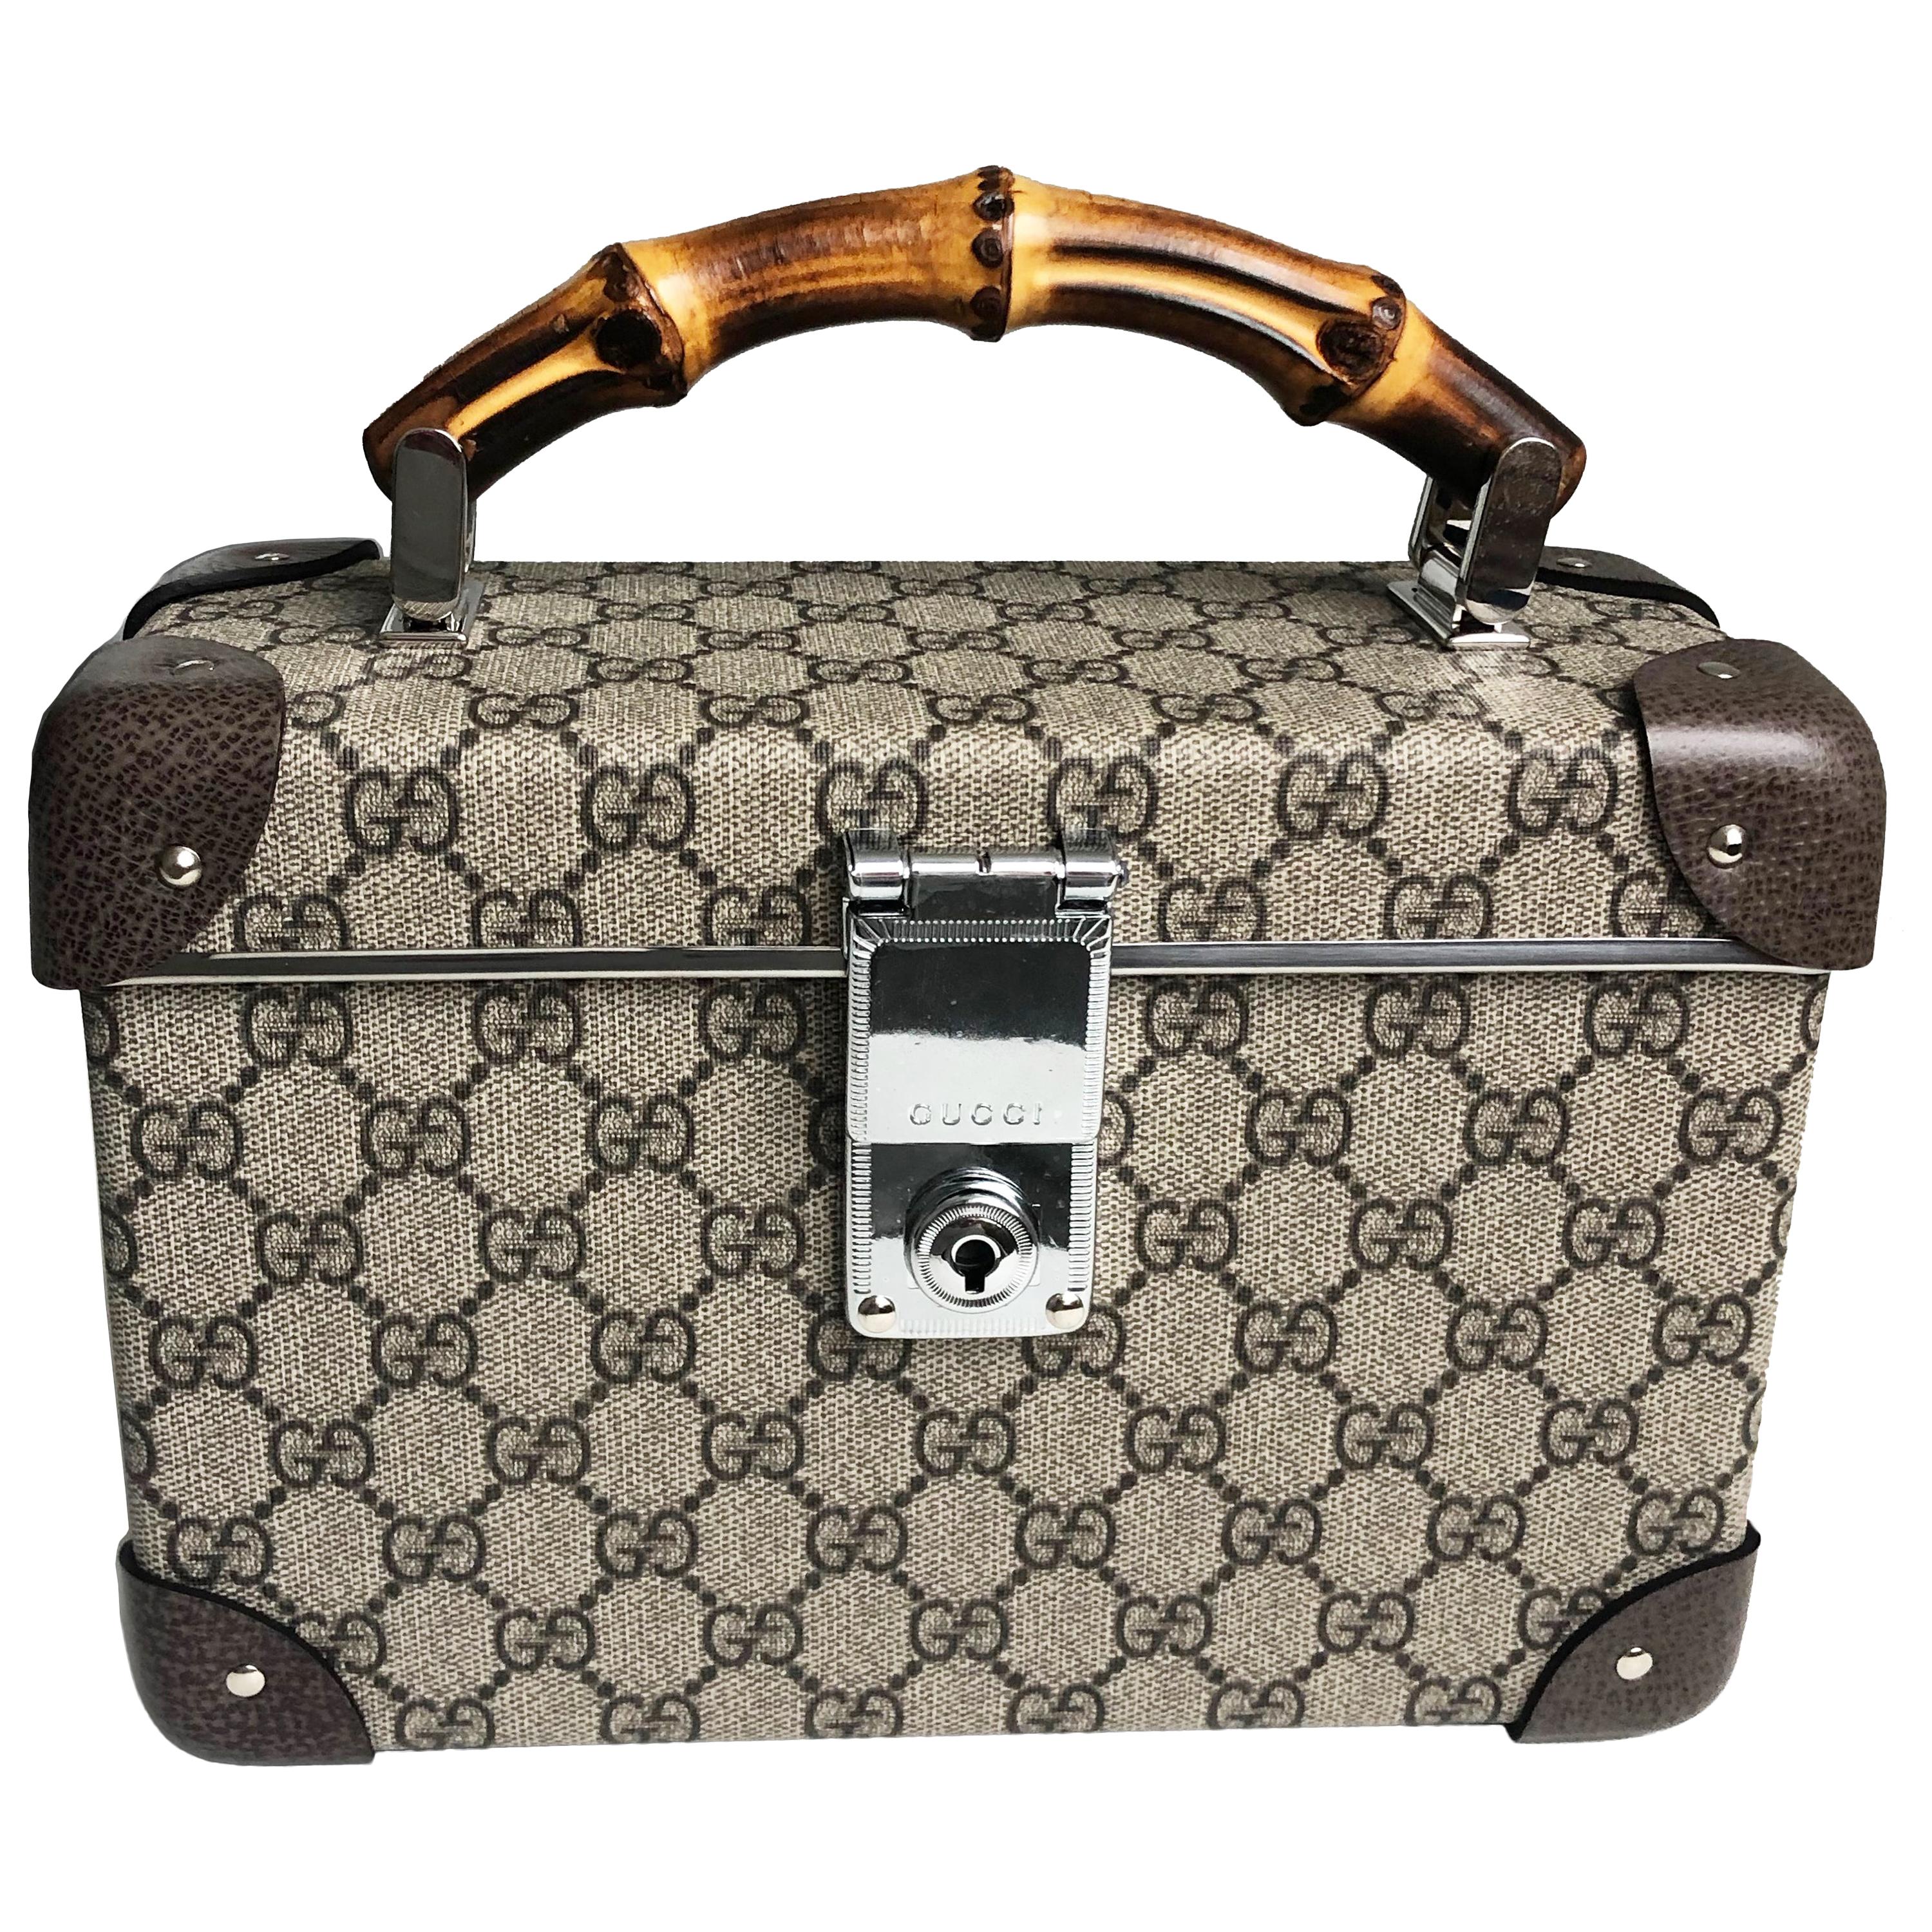 Gucci GG Canvas Beauty Train Case Bag with Bamboo Handle - Bergdorf Goodman